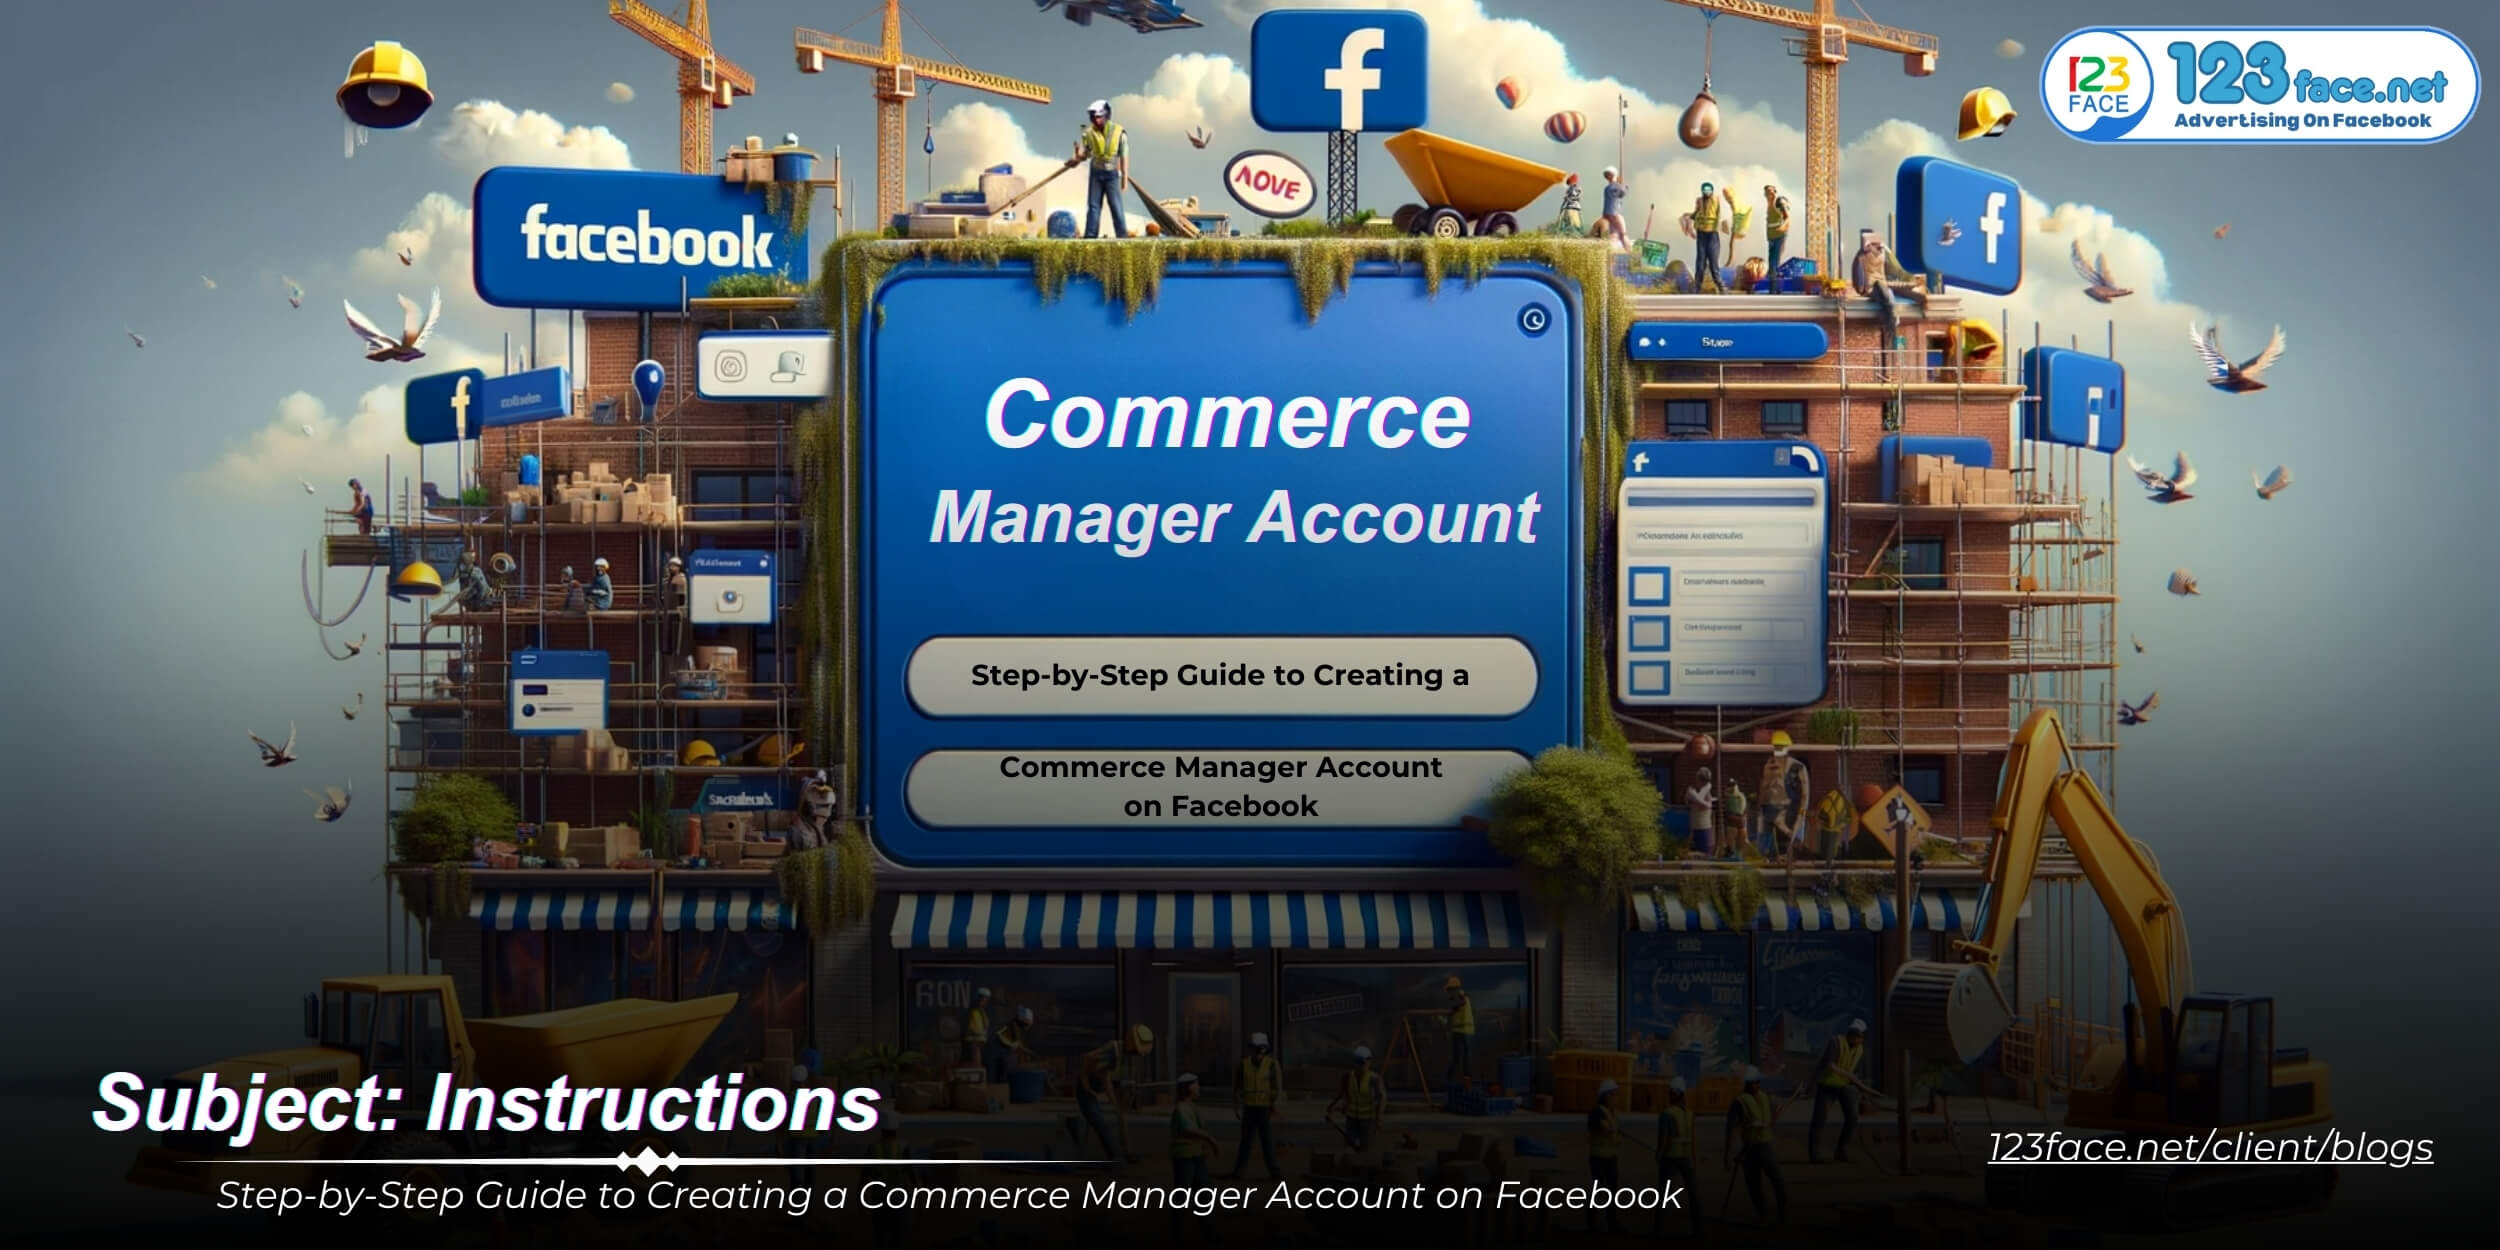 Step-by-Step Guide to Creating a Commerce Manager Account on Facebook